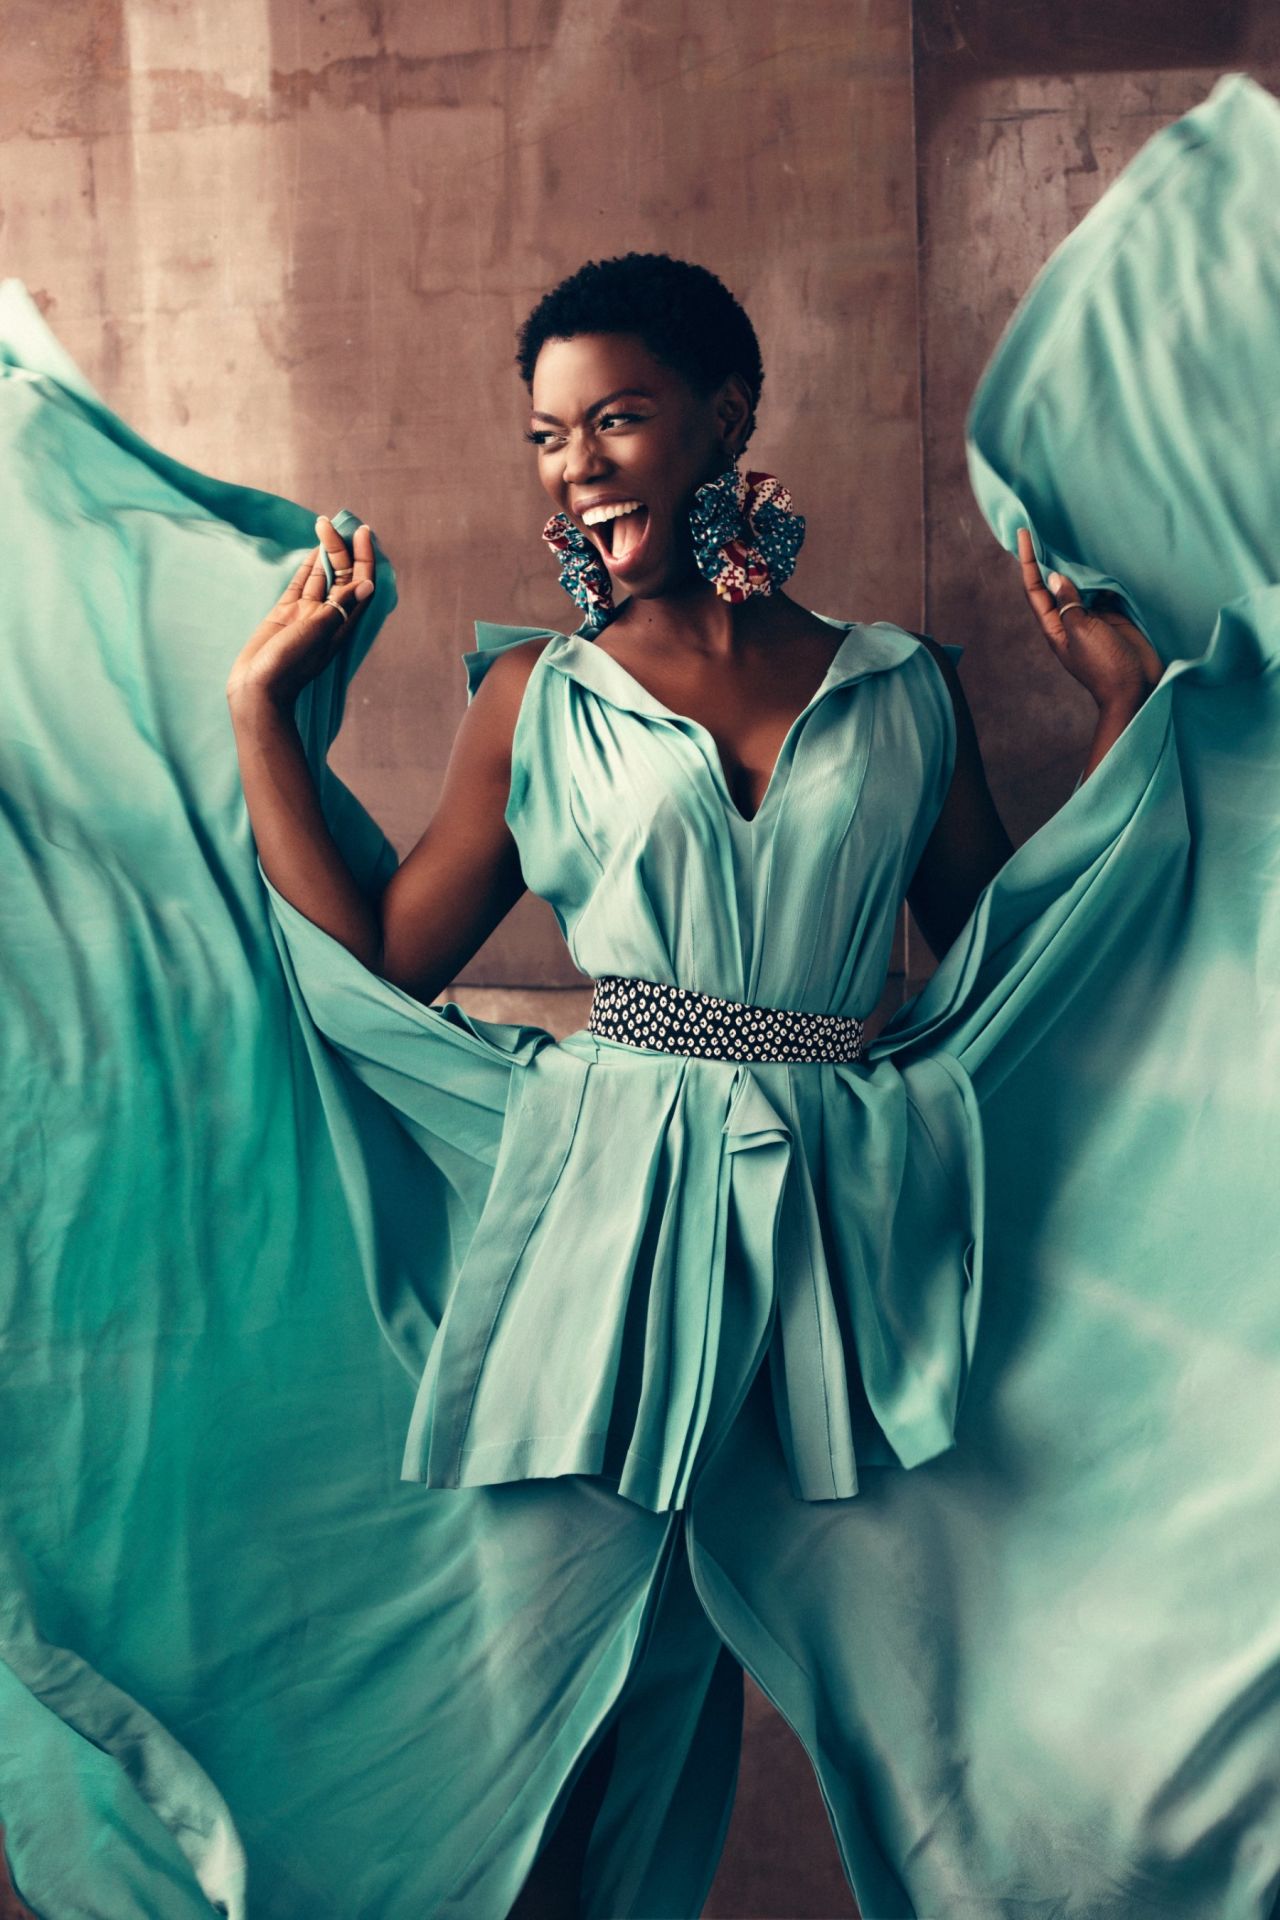 South-African singer Lira has released five platinum selling albums over the past decade and was nominated at the BET Awards for "Best International Artist." 